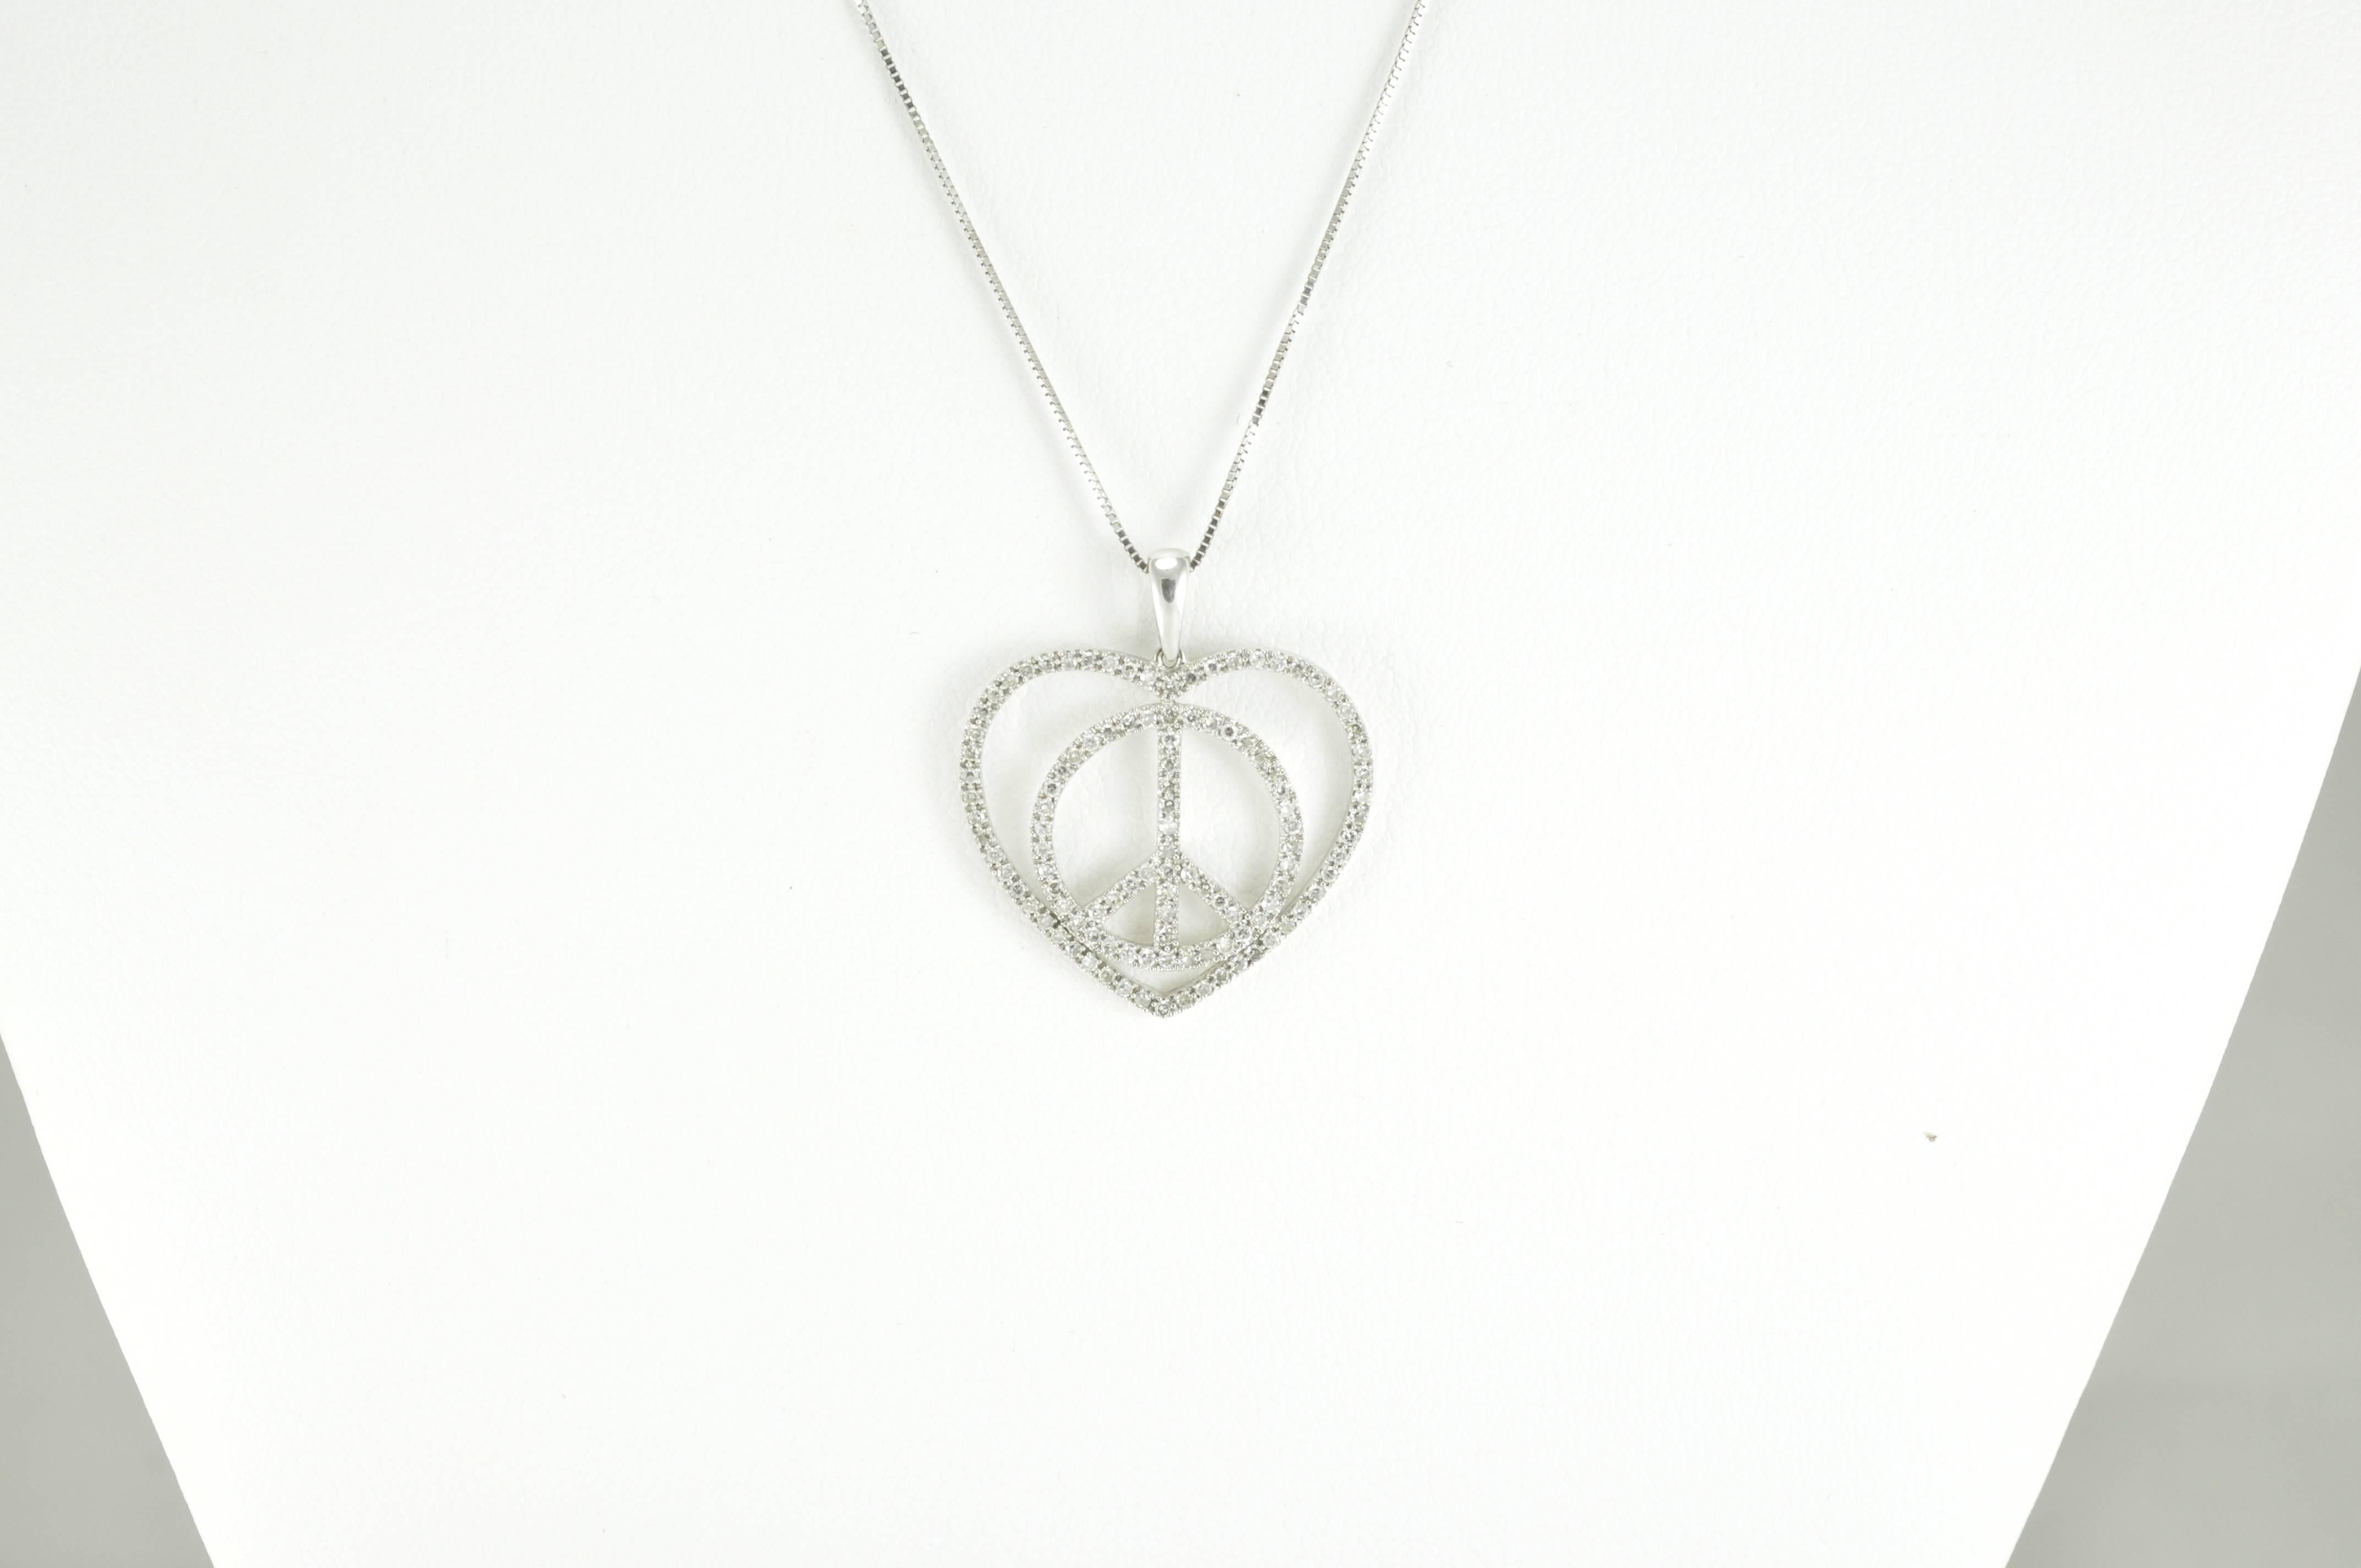 14k White Gold 0.50ct Round Brilliant Diamond Heart surrounding a Peace symbol Pendant on a 16 inch, small box-style chain. Chain is stamped 14k and ITALY. The pendant is stamped 14kSR. The pendant itself measures just over 1 inch tall, 7/8 inch